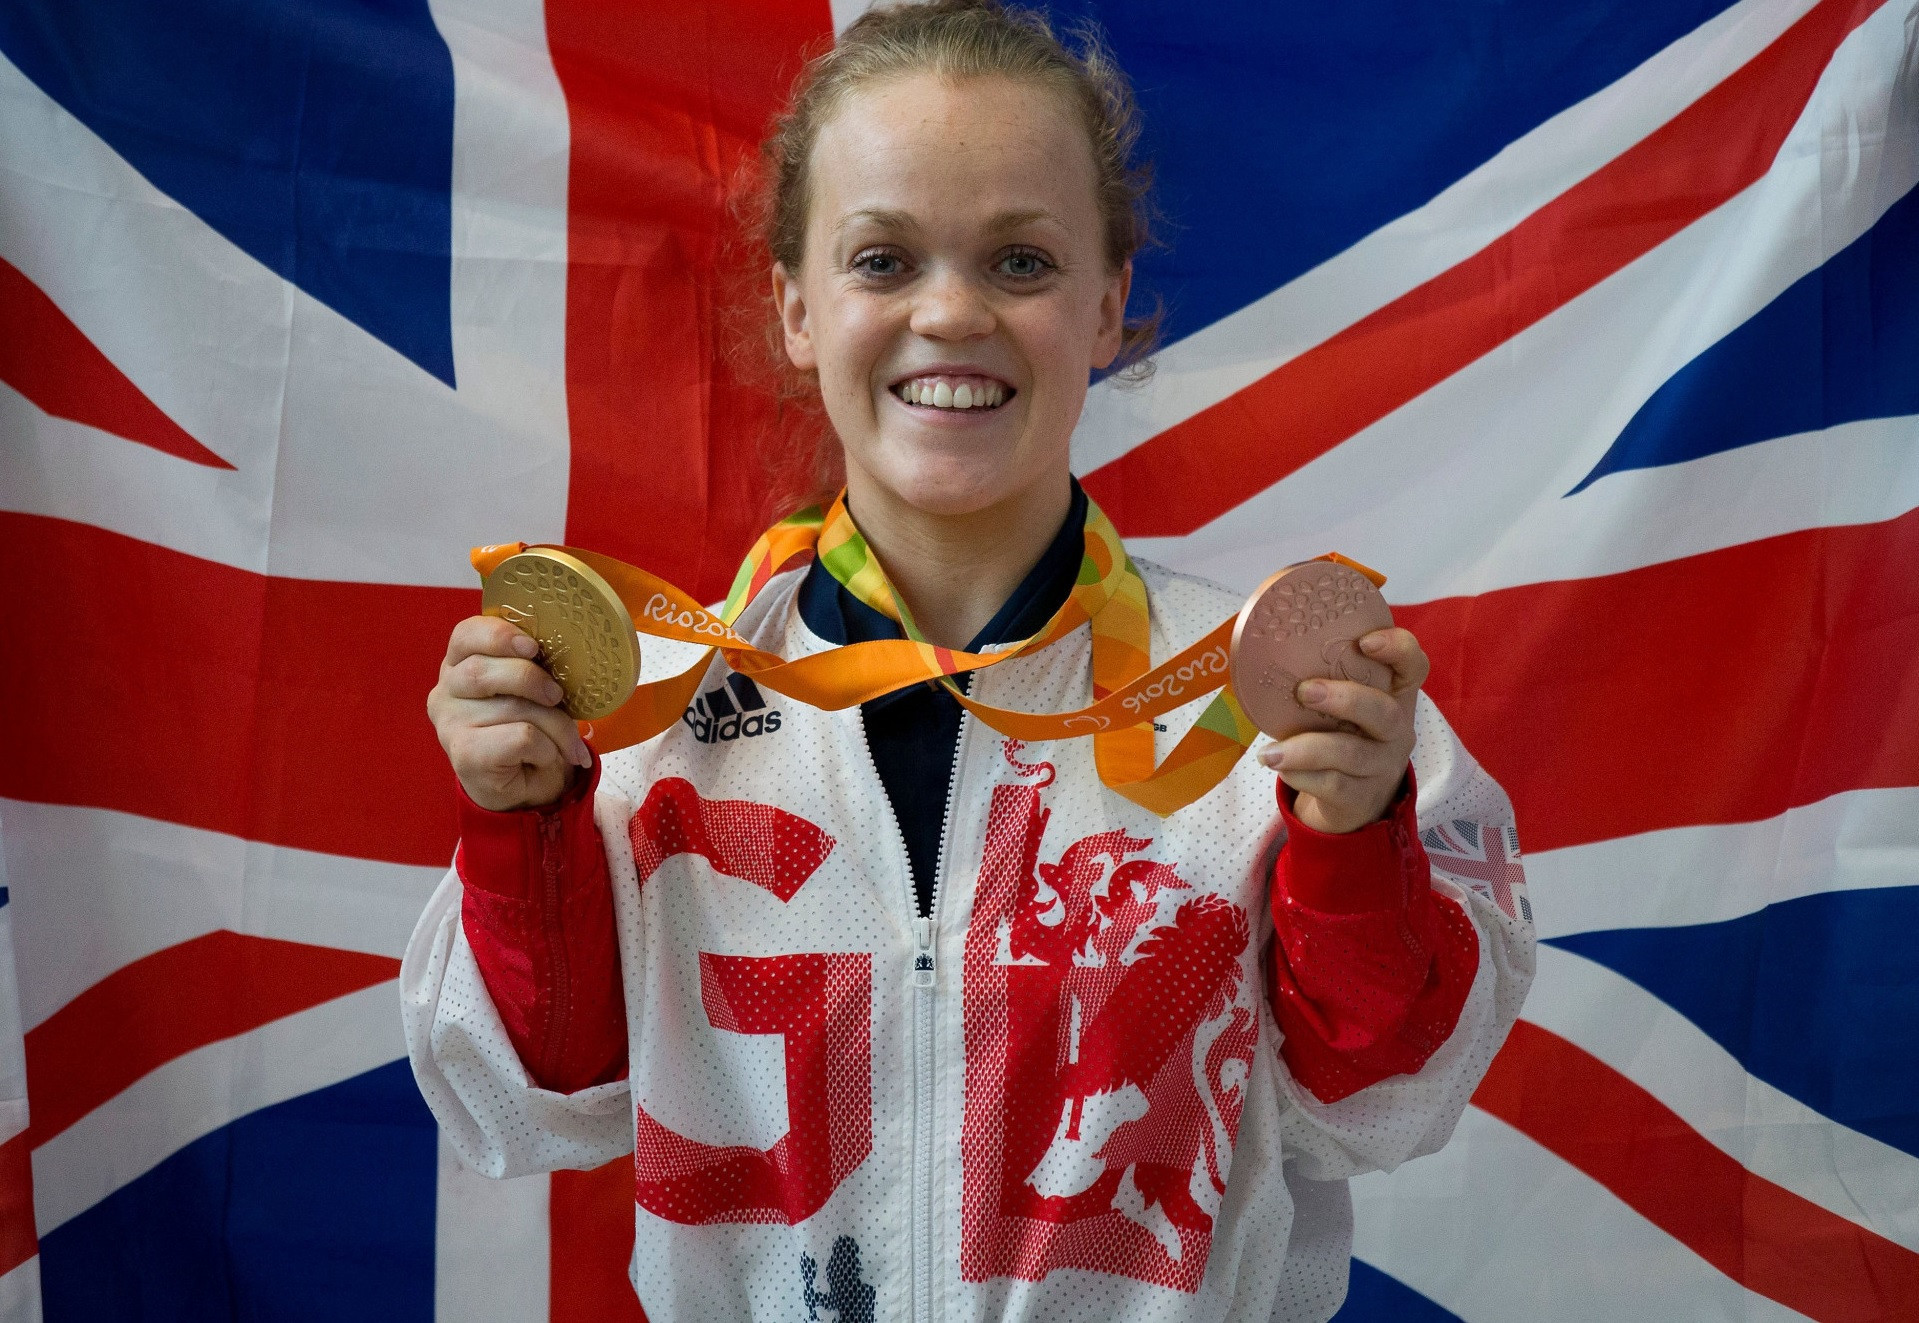 Swimmer Ellie Simmonds is among the Paralympic Games stars who has captivated British television viewers ©Getty Images